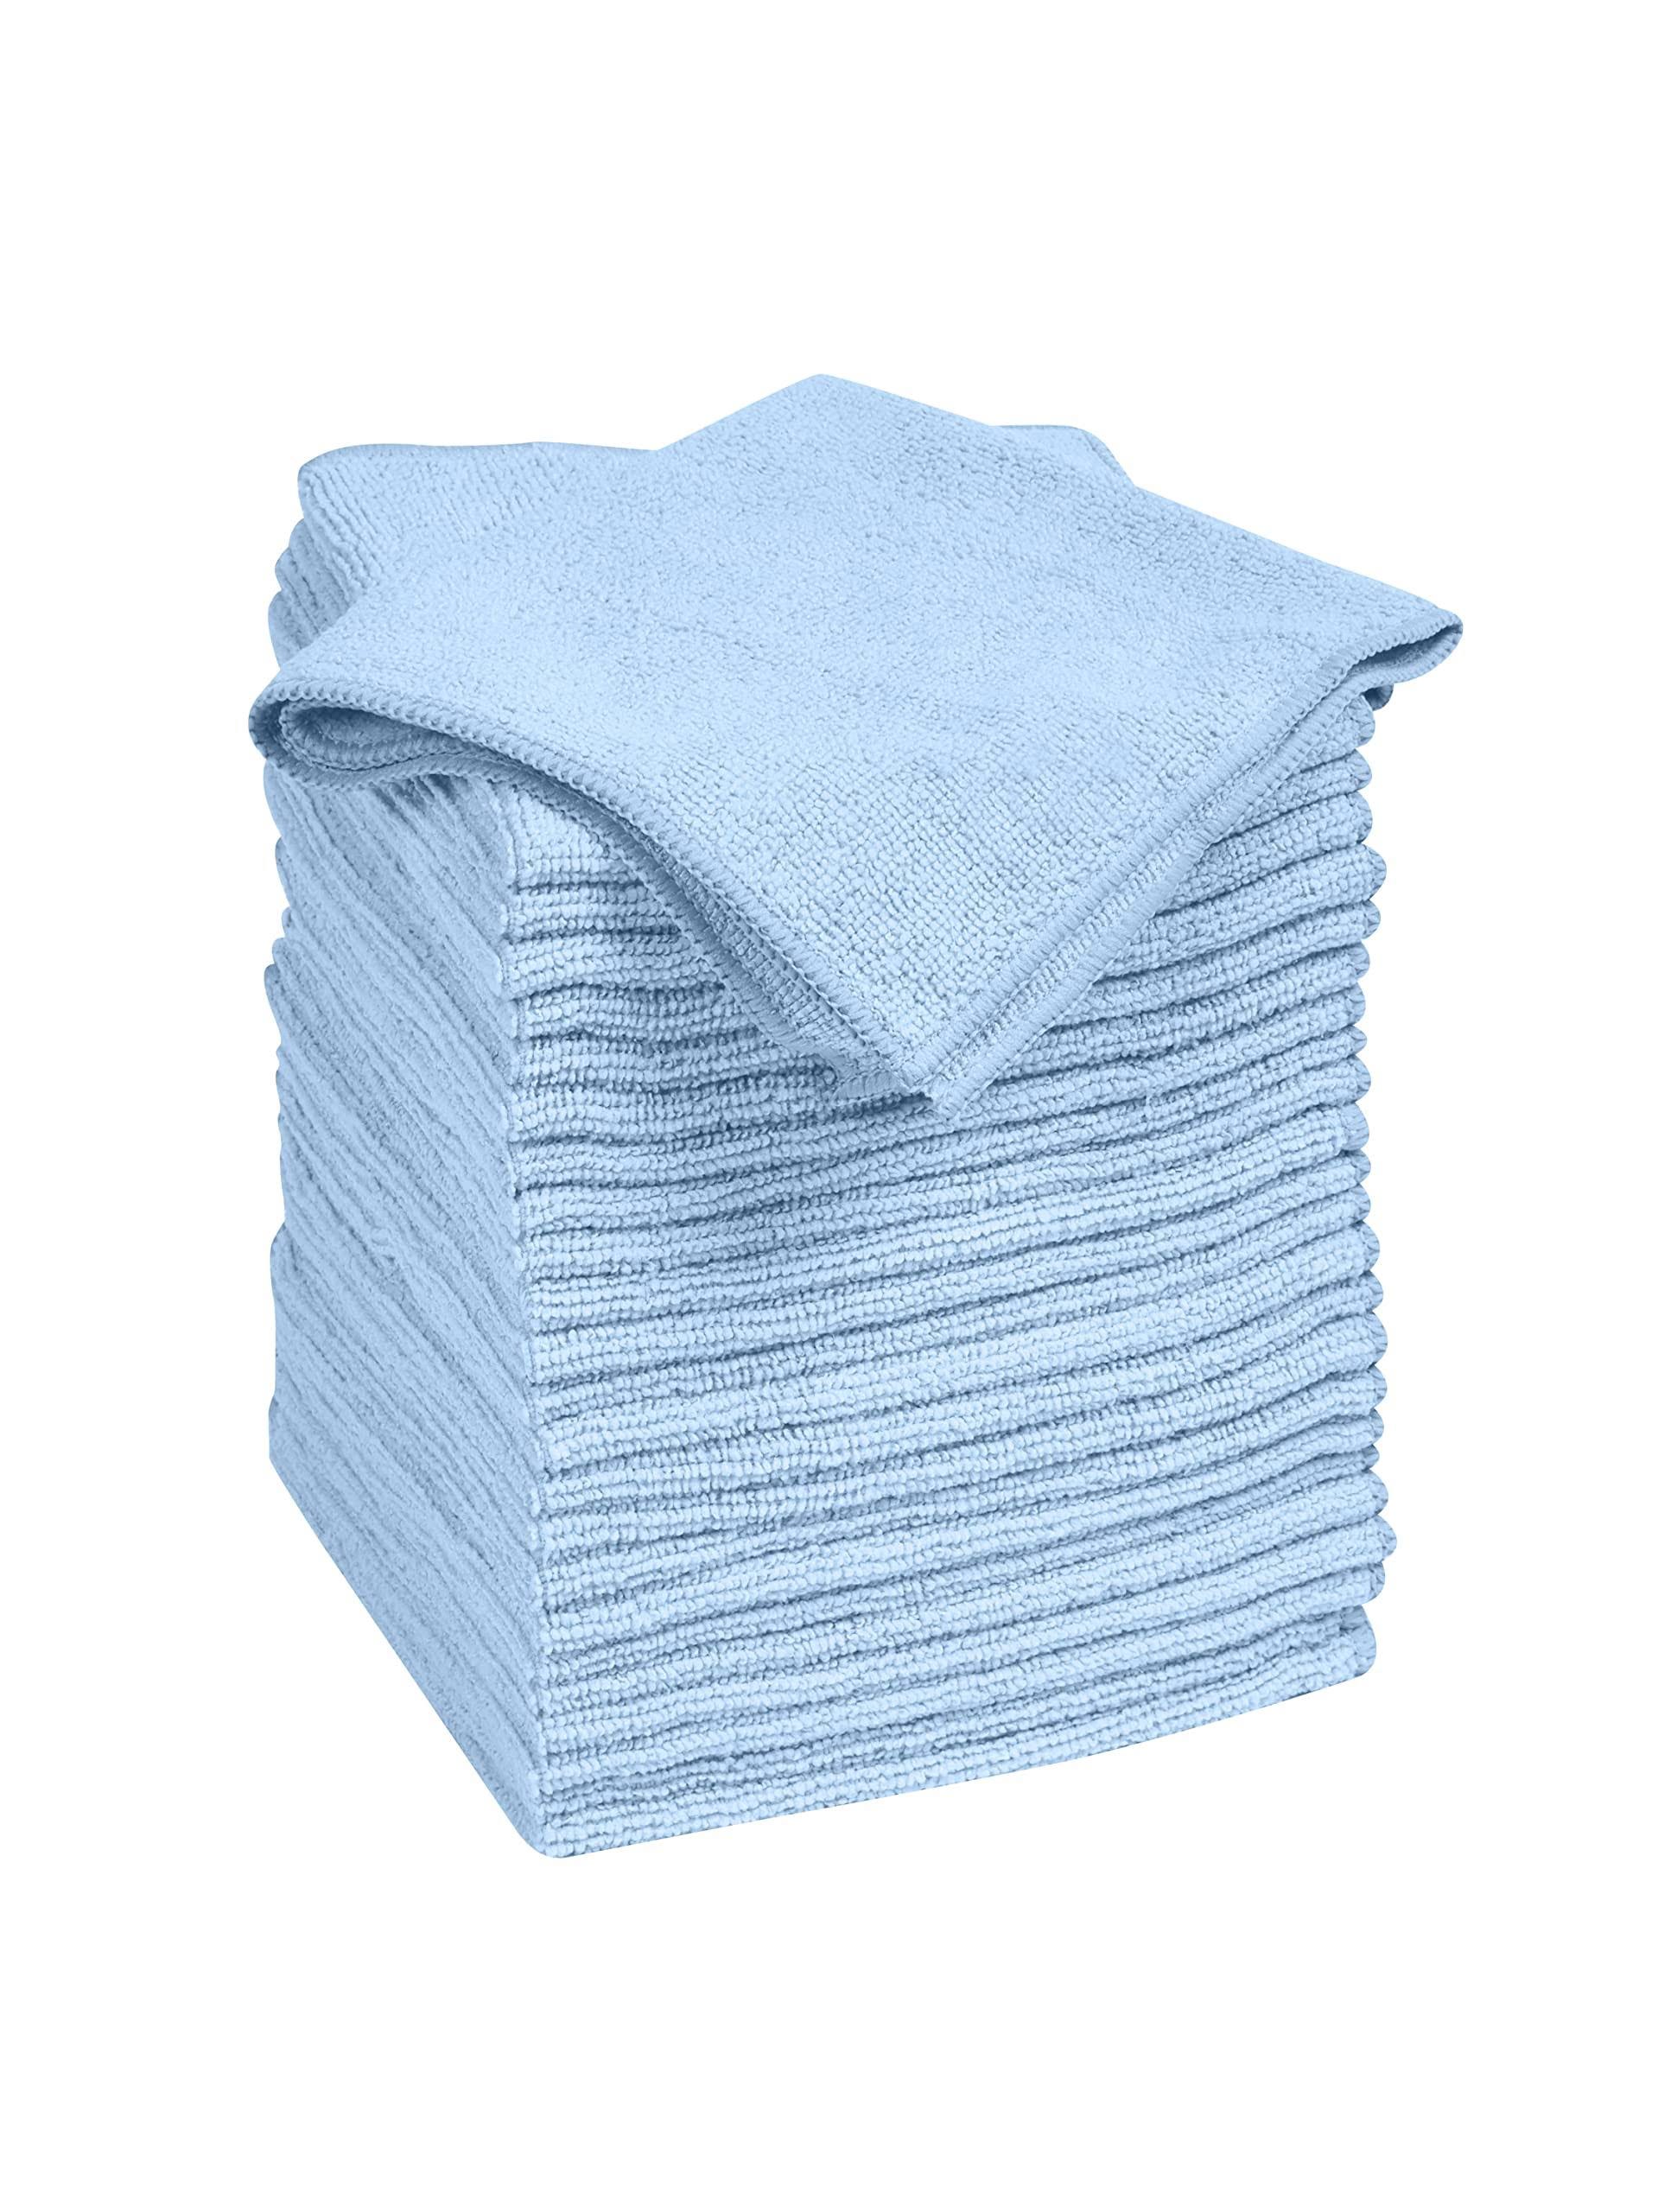 Affordable 24-pack Quickie Microfiber Cleaning Cloths - Lint-free, Washable, and Multi-surface Applicable | Image